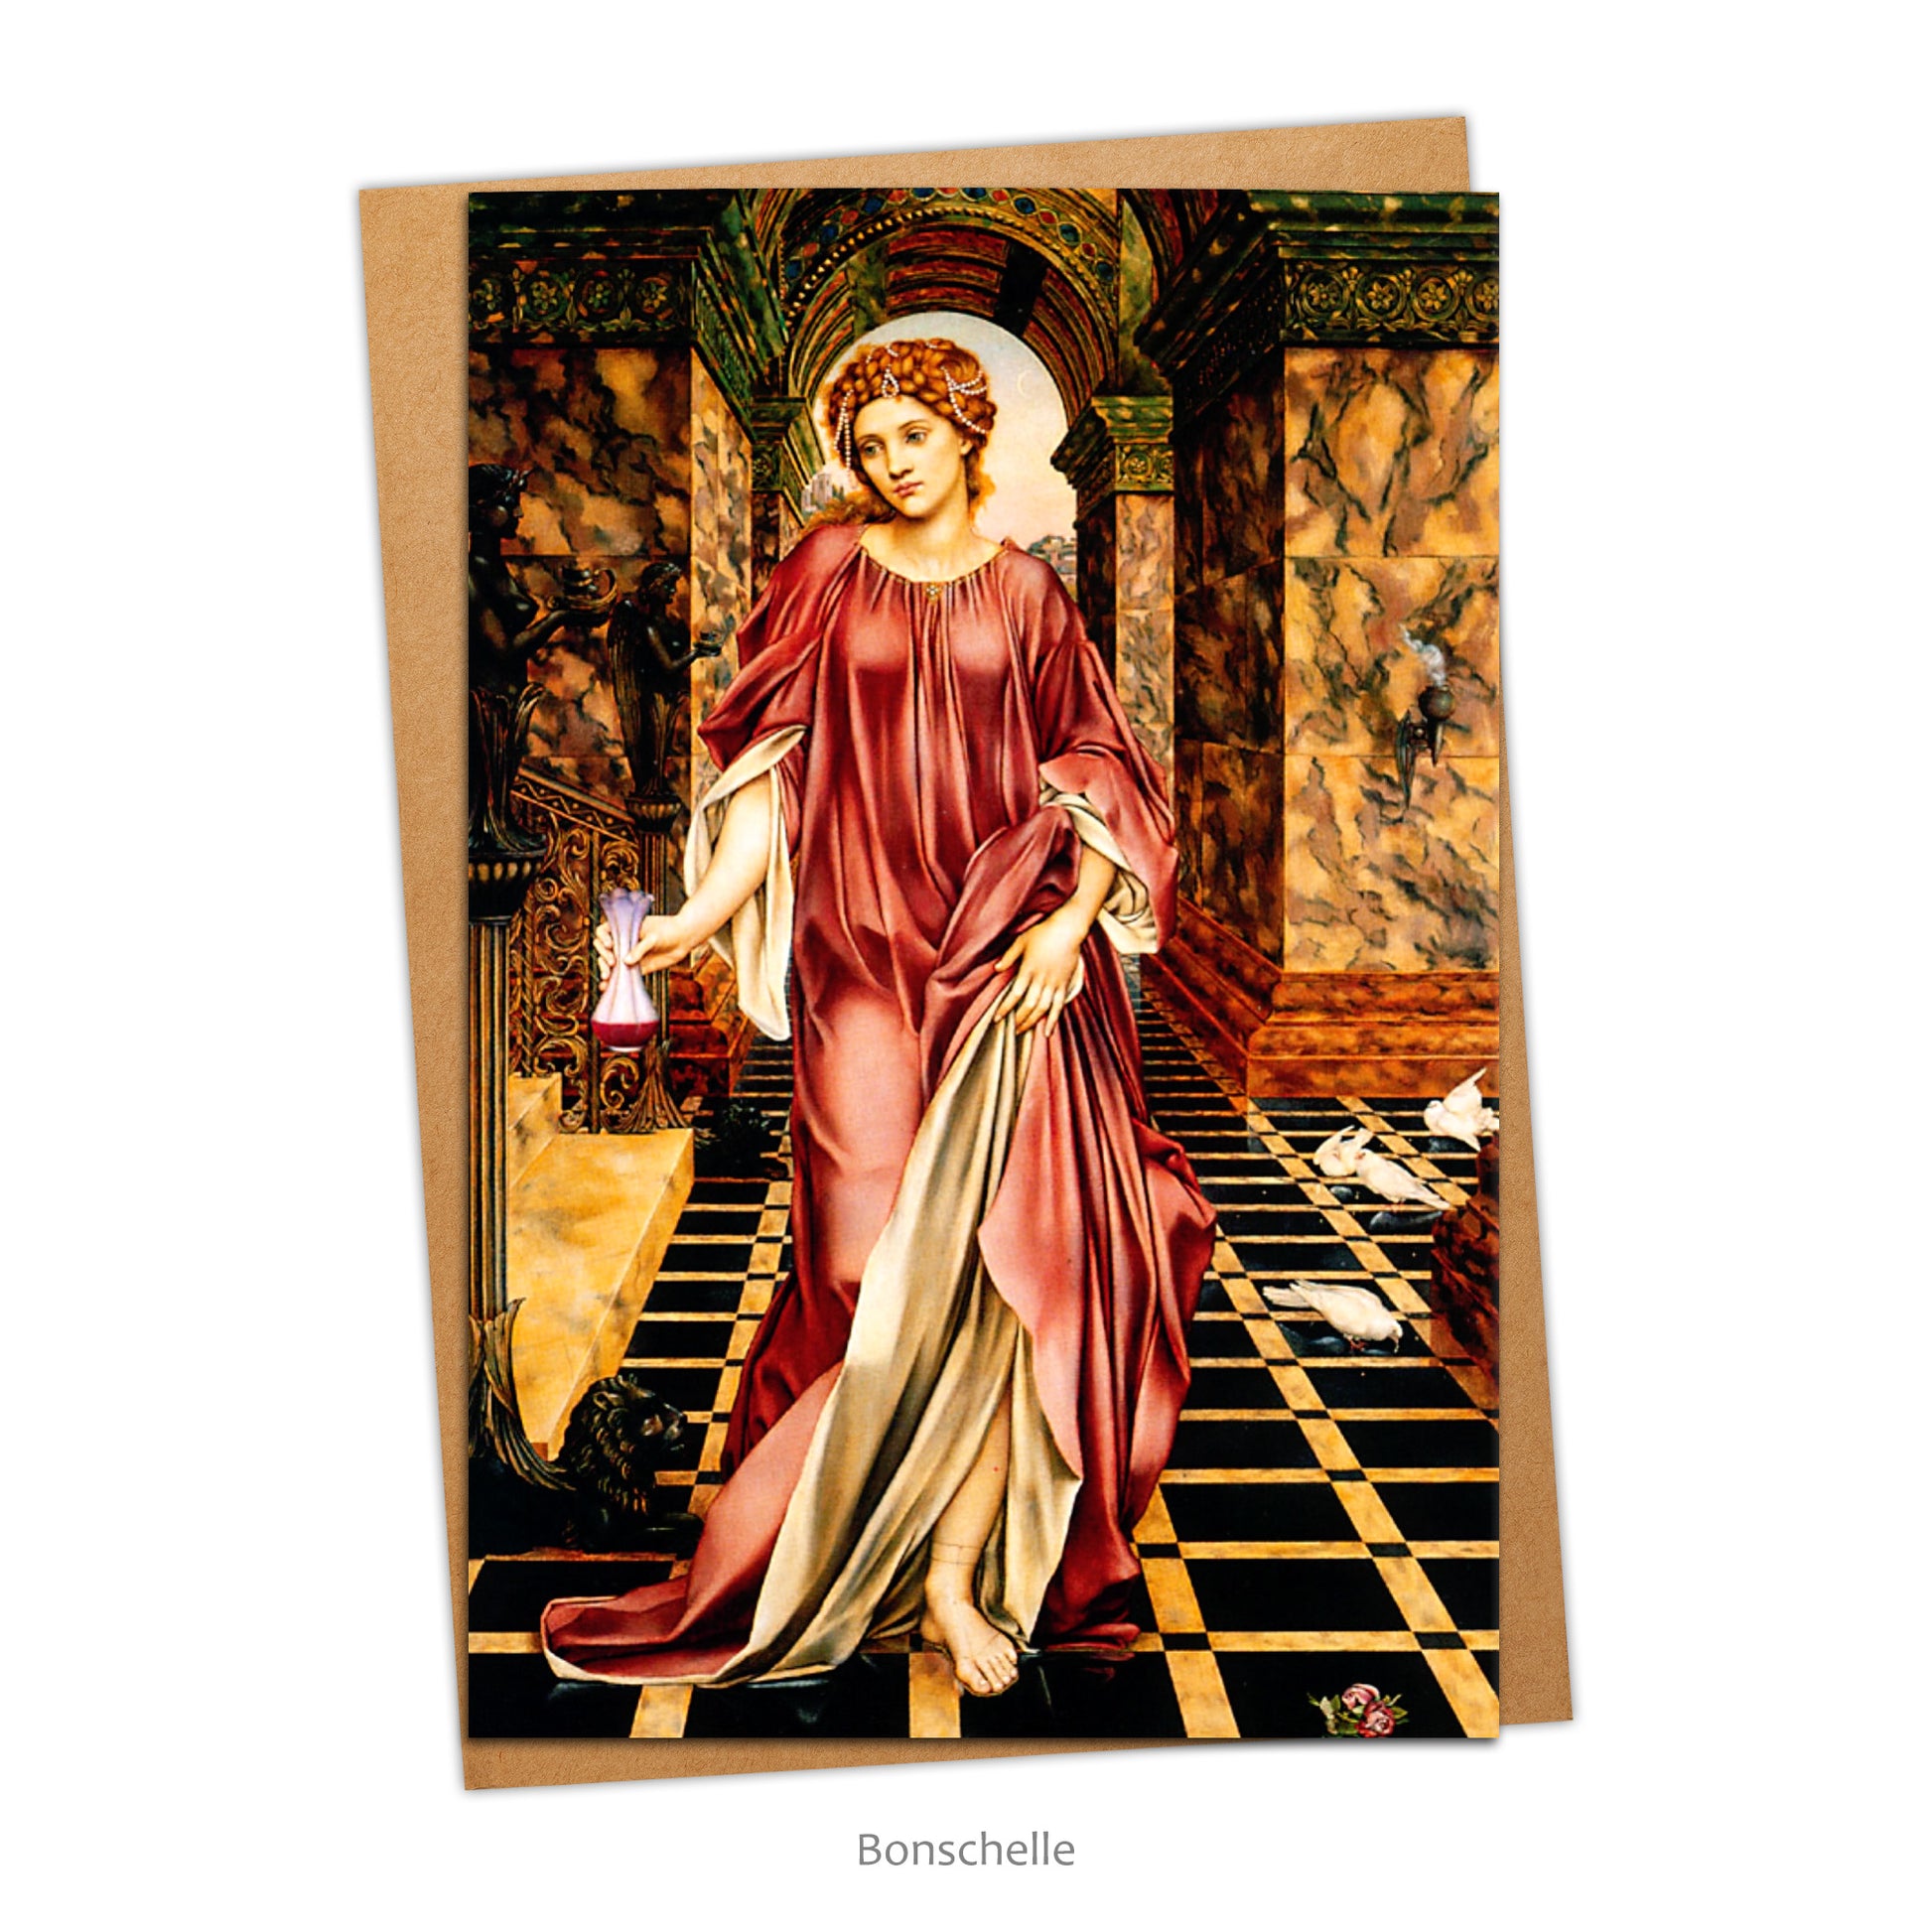 Card and envelope with the image of 'Medea' from Greek Mythology by Pre-Raphaelite artist, Evelyn De Morgan (1855–1919).